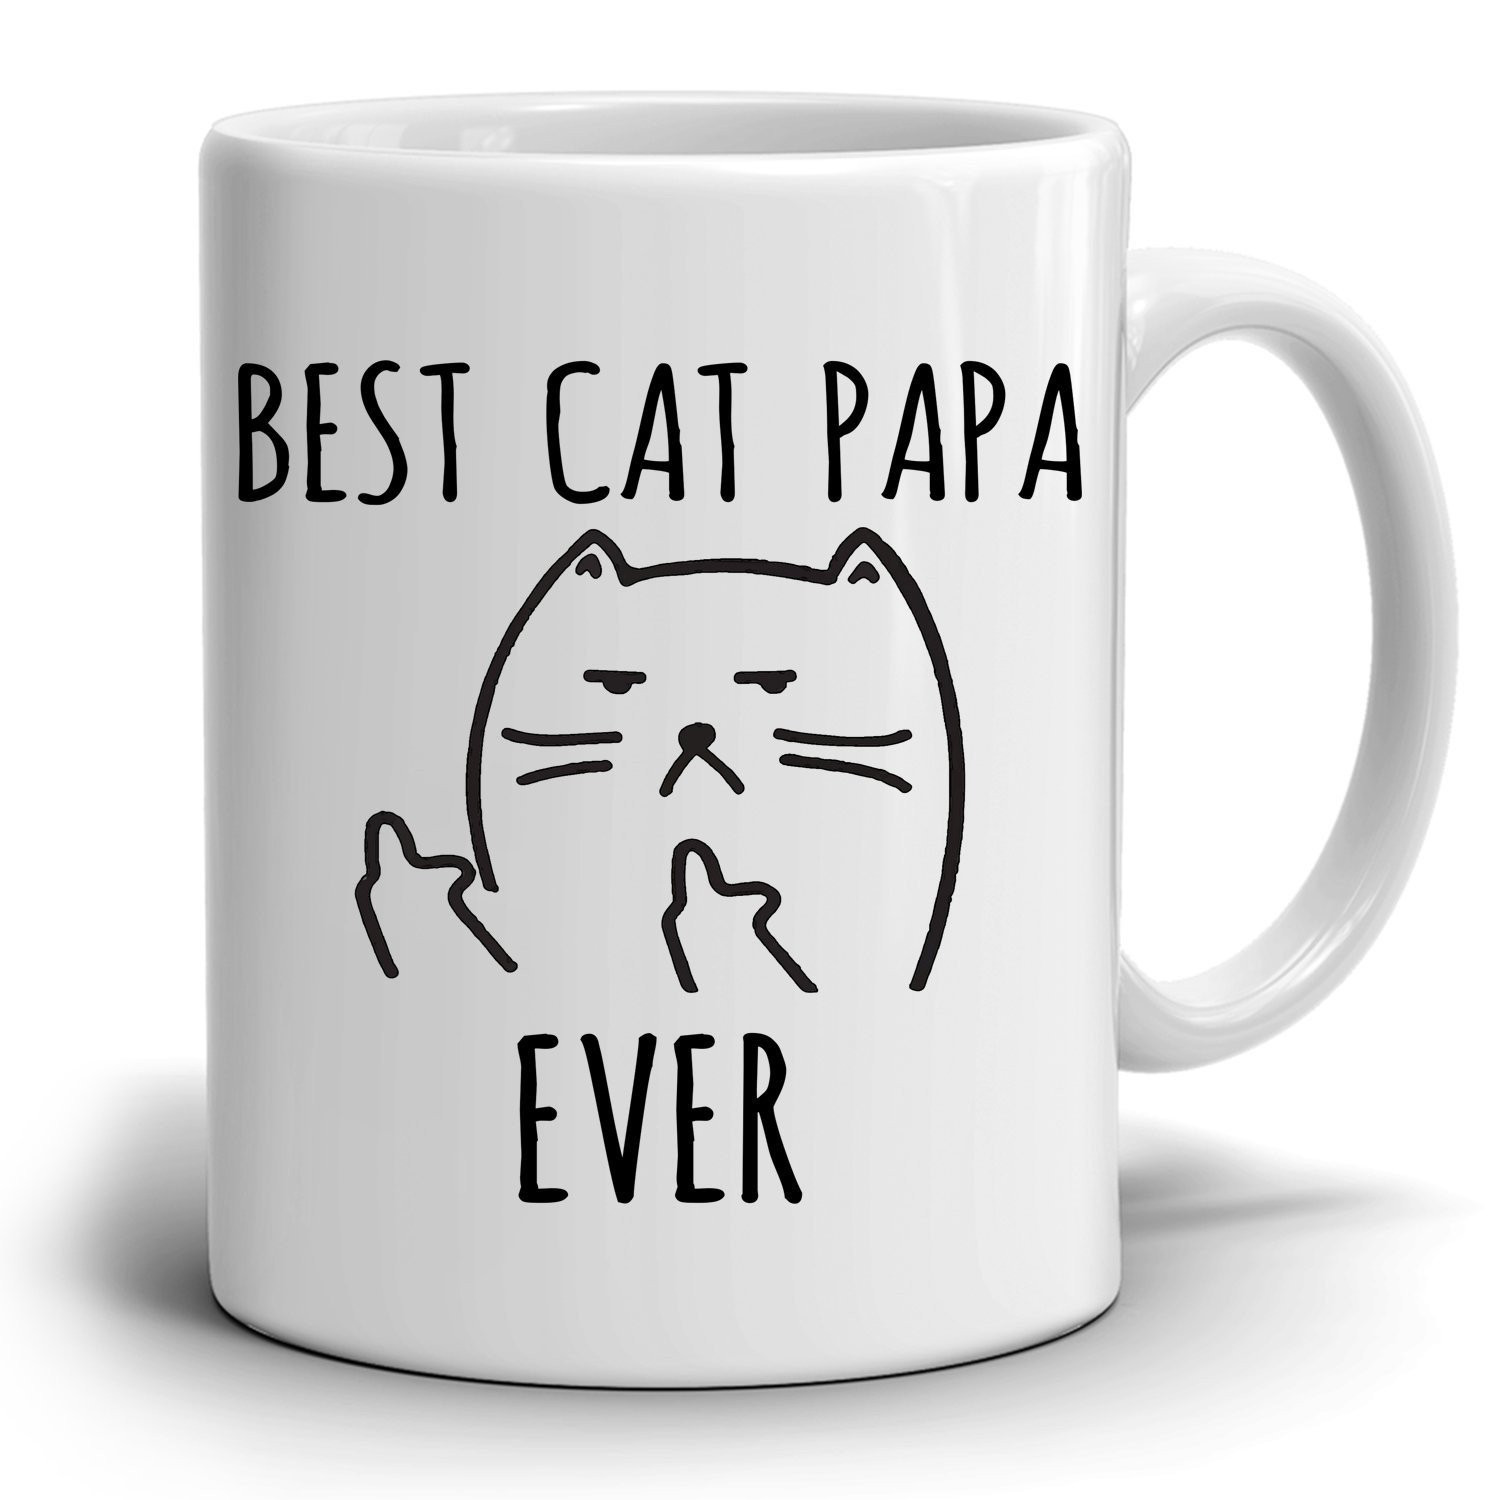 Birthday Gift Ideas For Father In Law
 Best Cat Papa Ever Funny Gifts for Dad Grandpa Father